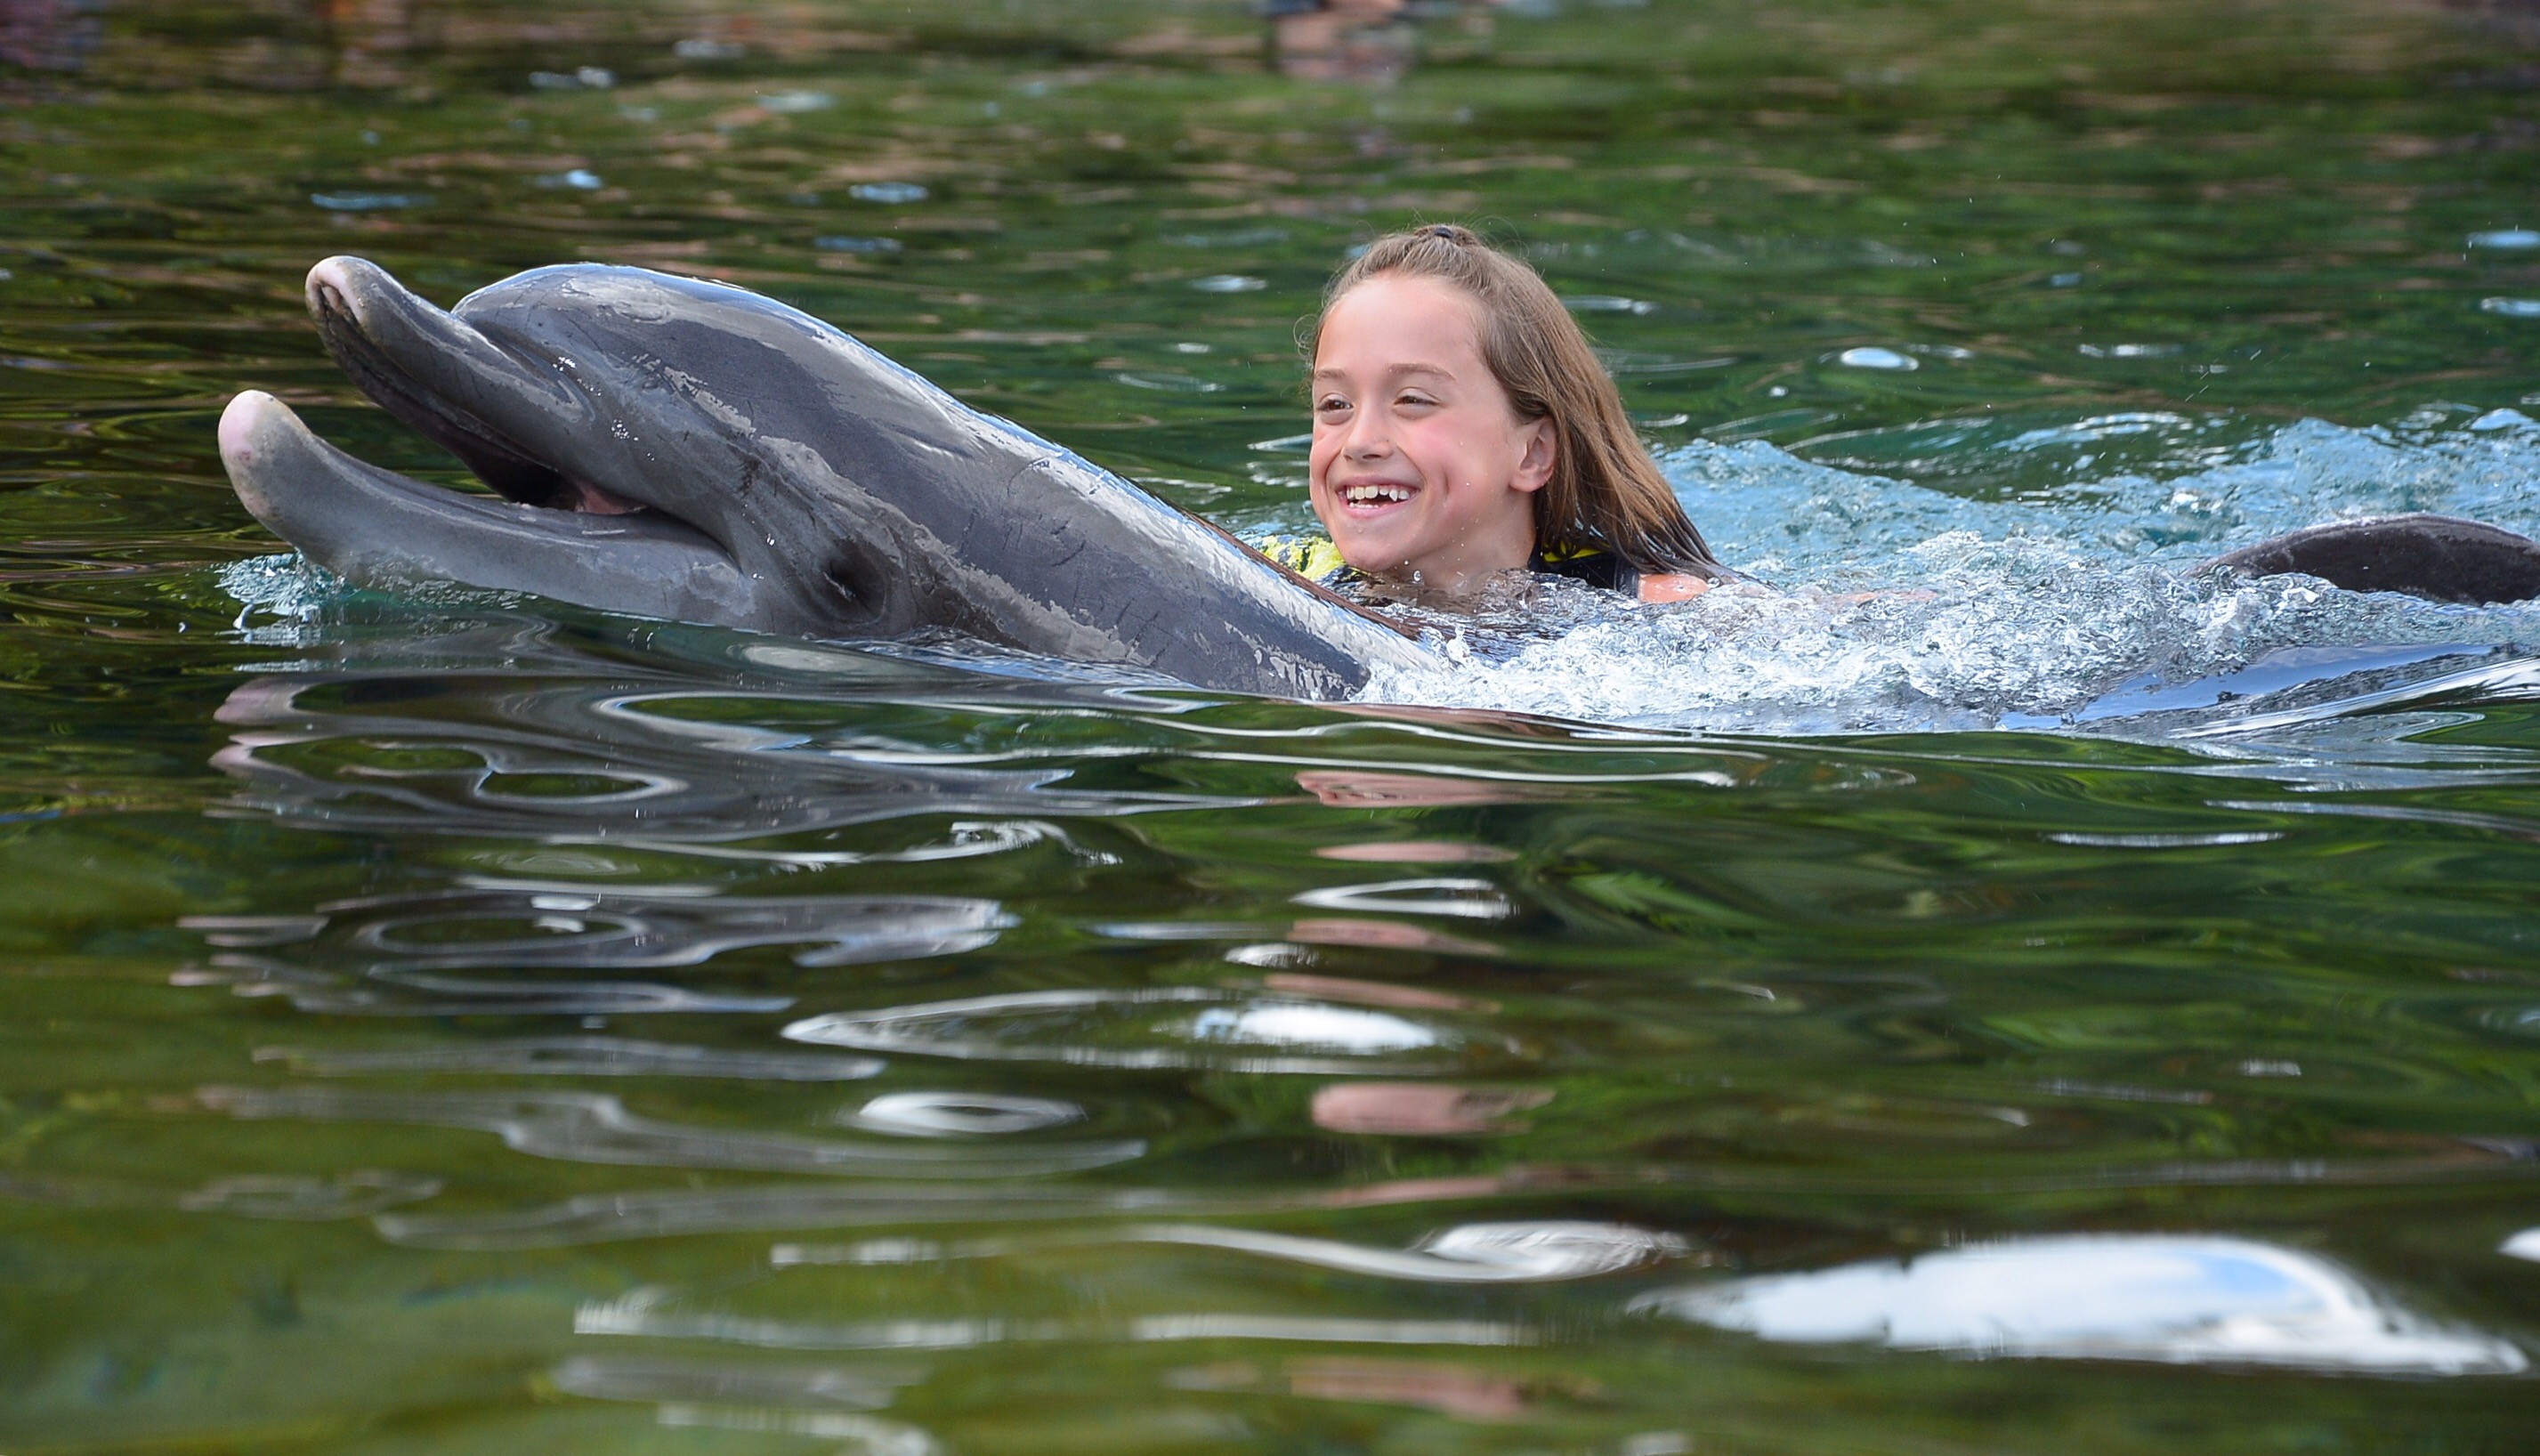 Details on Swimming with Dolphins at Discovery Cove